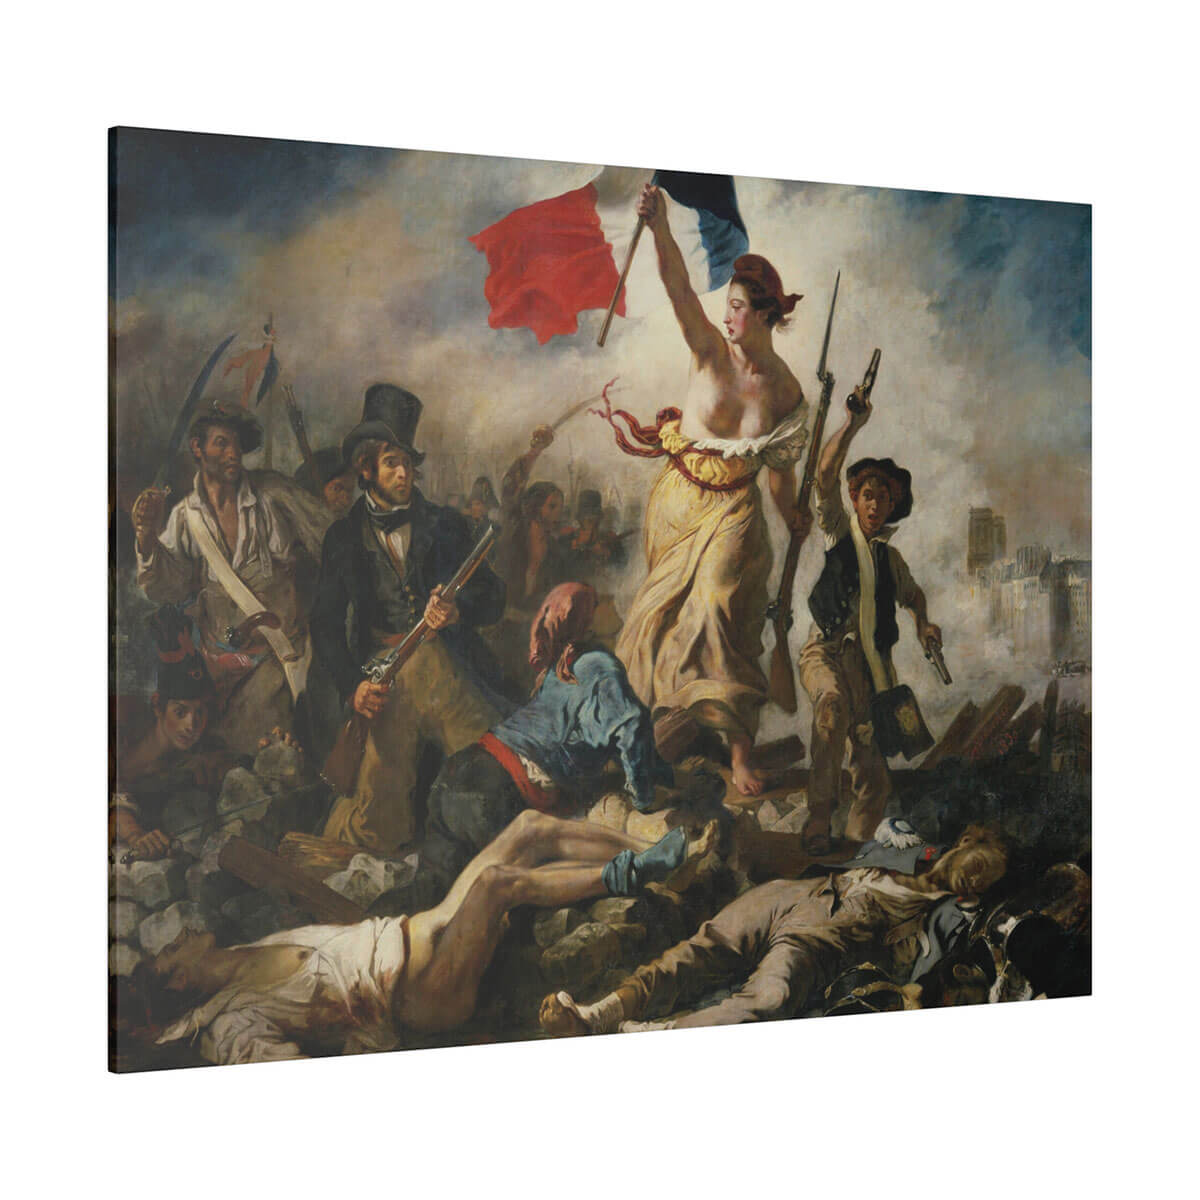 High-quality canvas reproduction